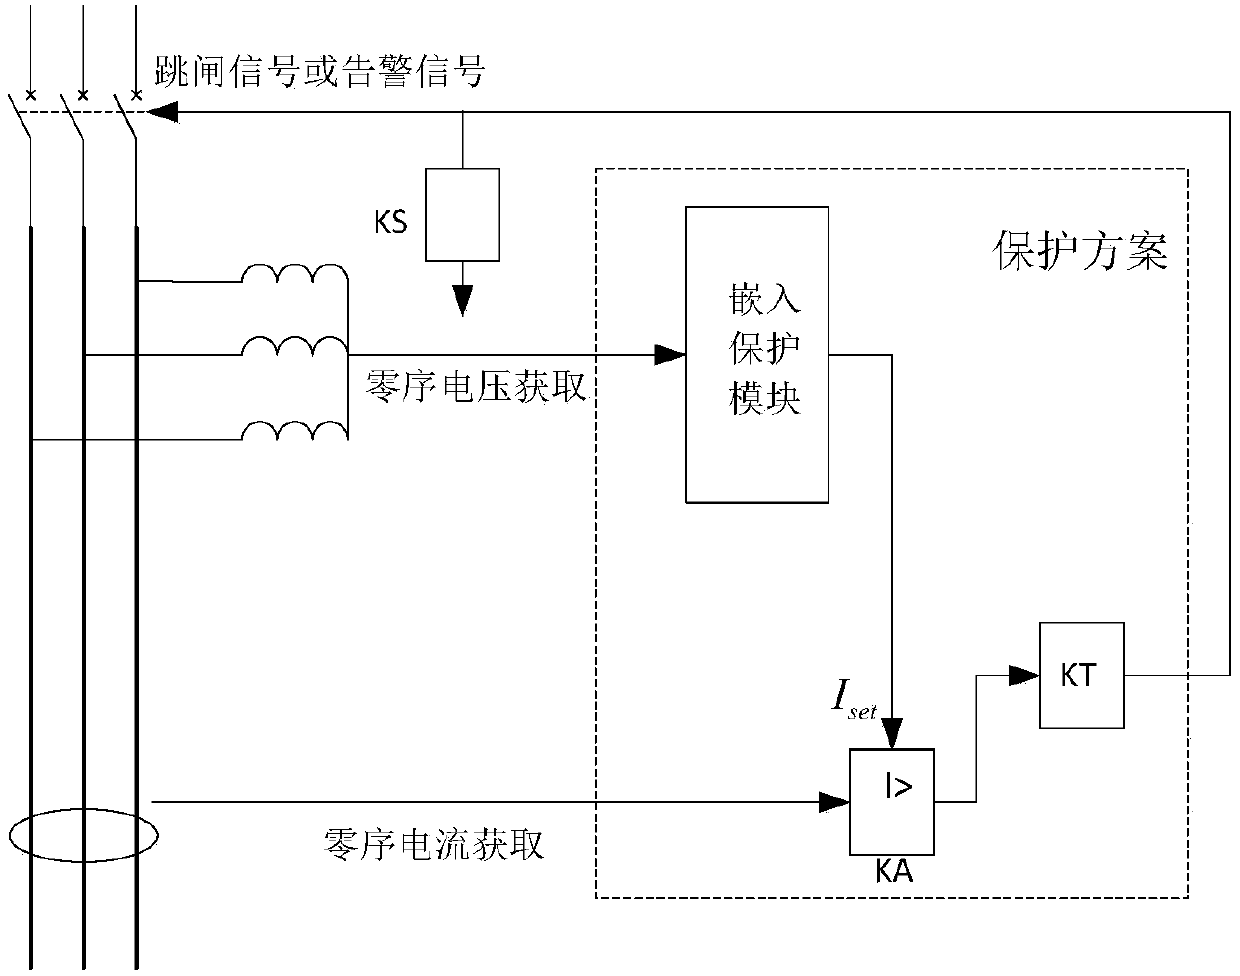 Protection method suitable for low resistance grounding system single phase grounding fault